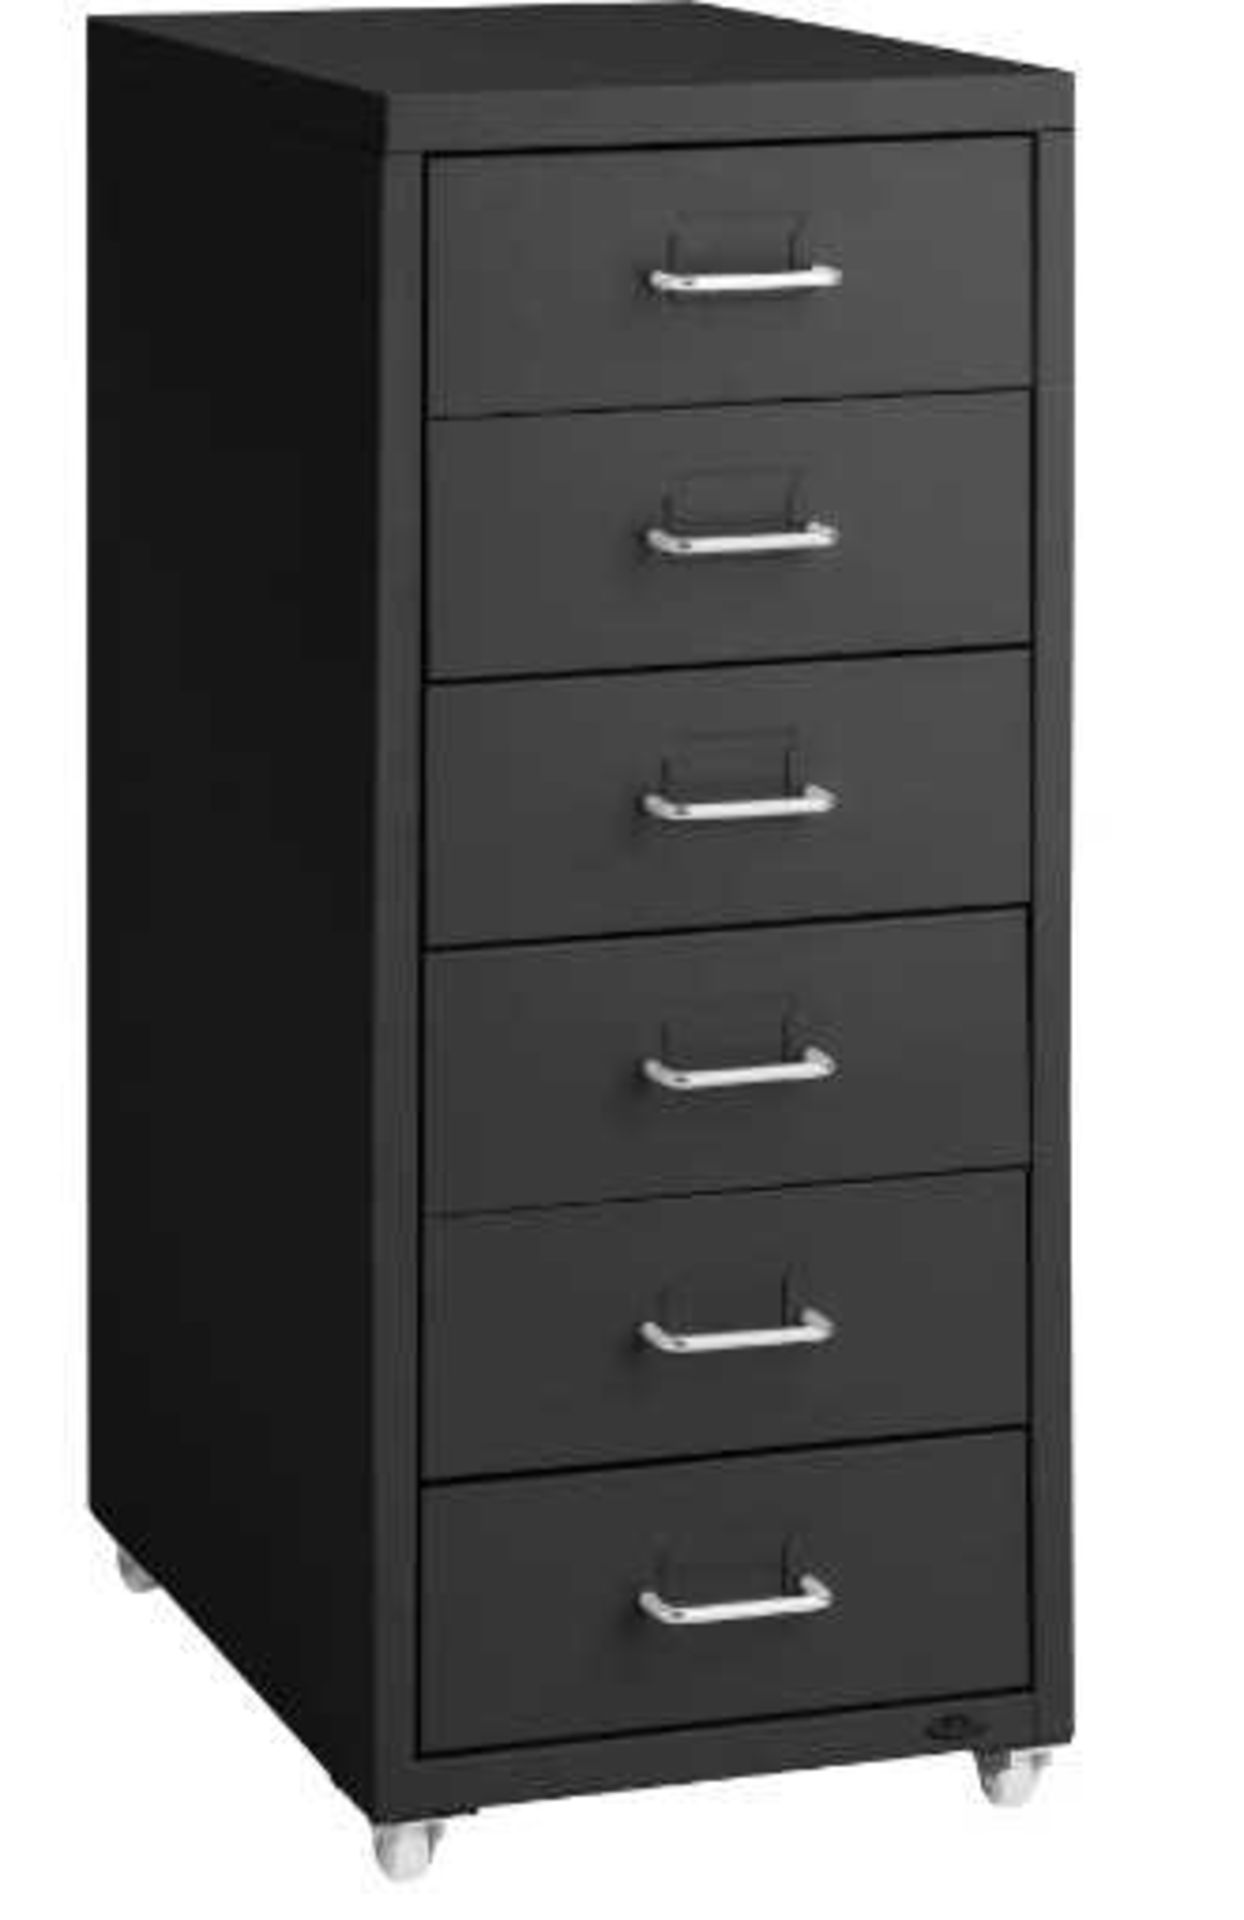 VAT Tectake - Filing Cabinet on Casters - Metal Black - Unchecked & Boxed. RRP œ75.99